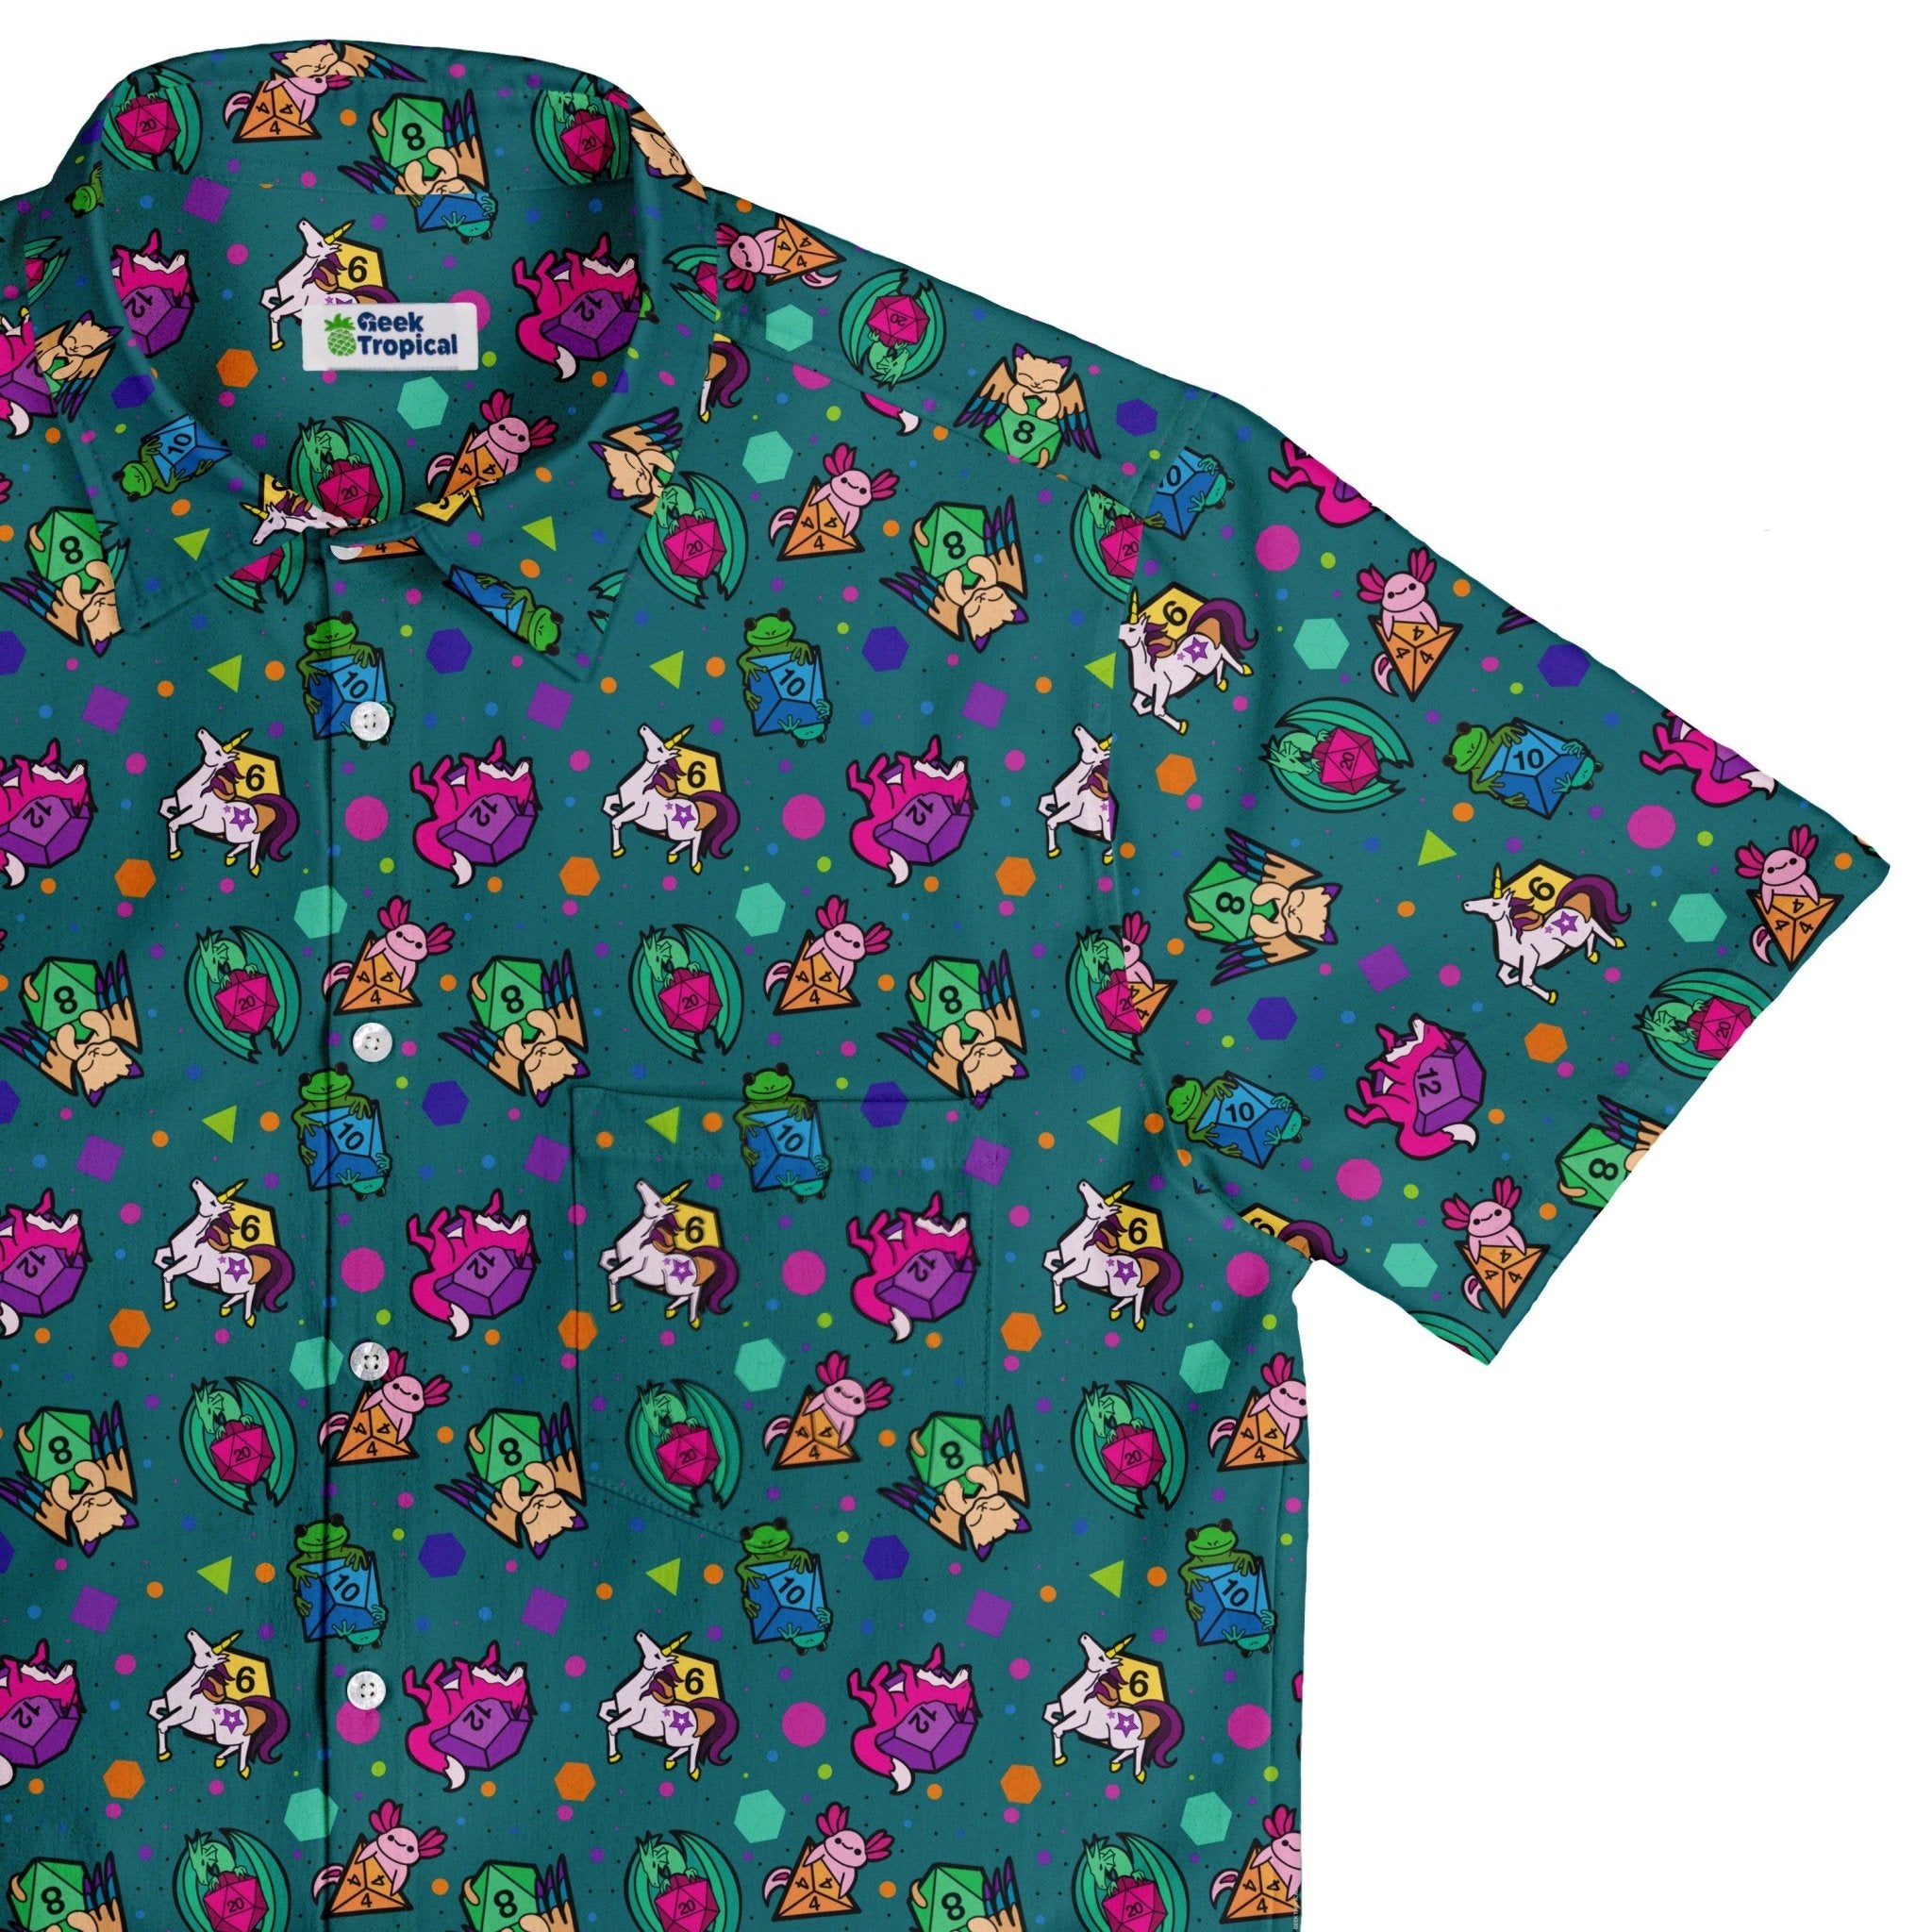 Dnd Dice Critters Teal Button Up Shirt - adult sizing - Animal Patterns - Designed by Rose Khan